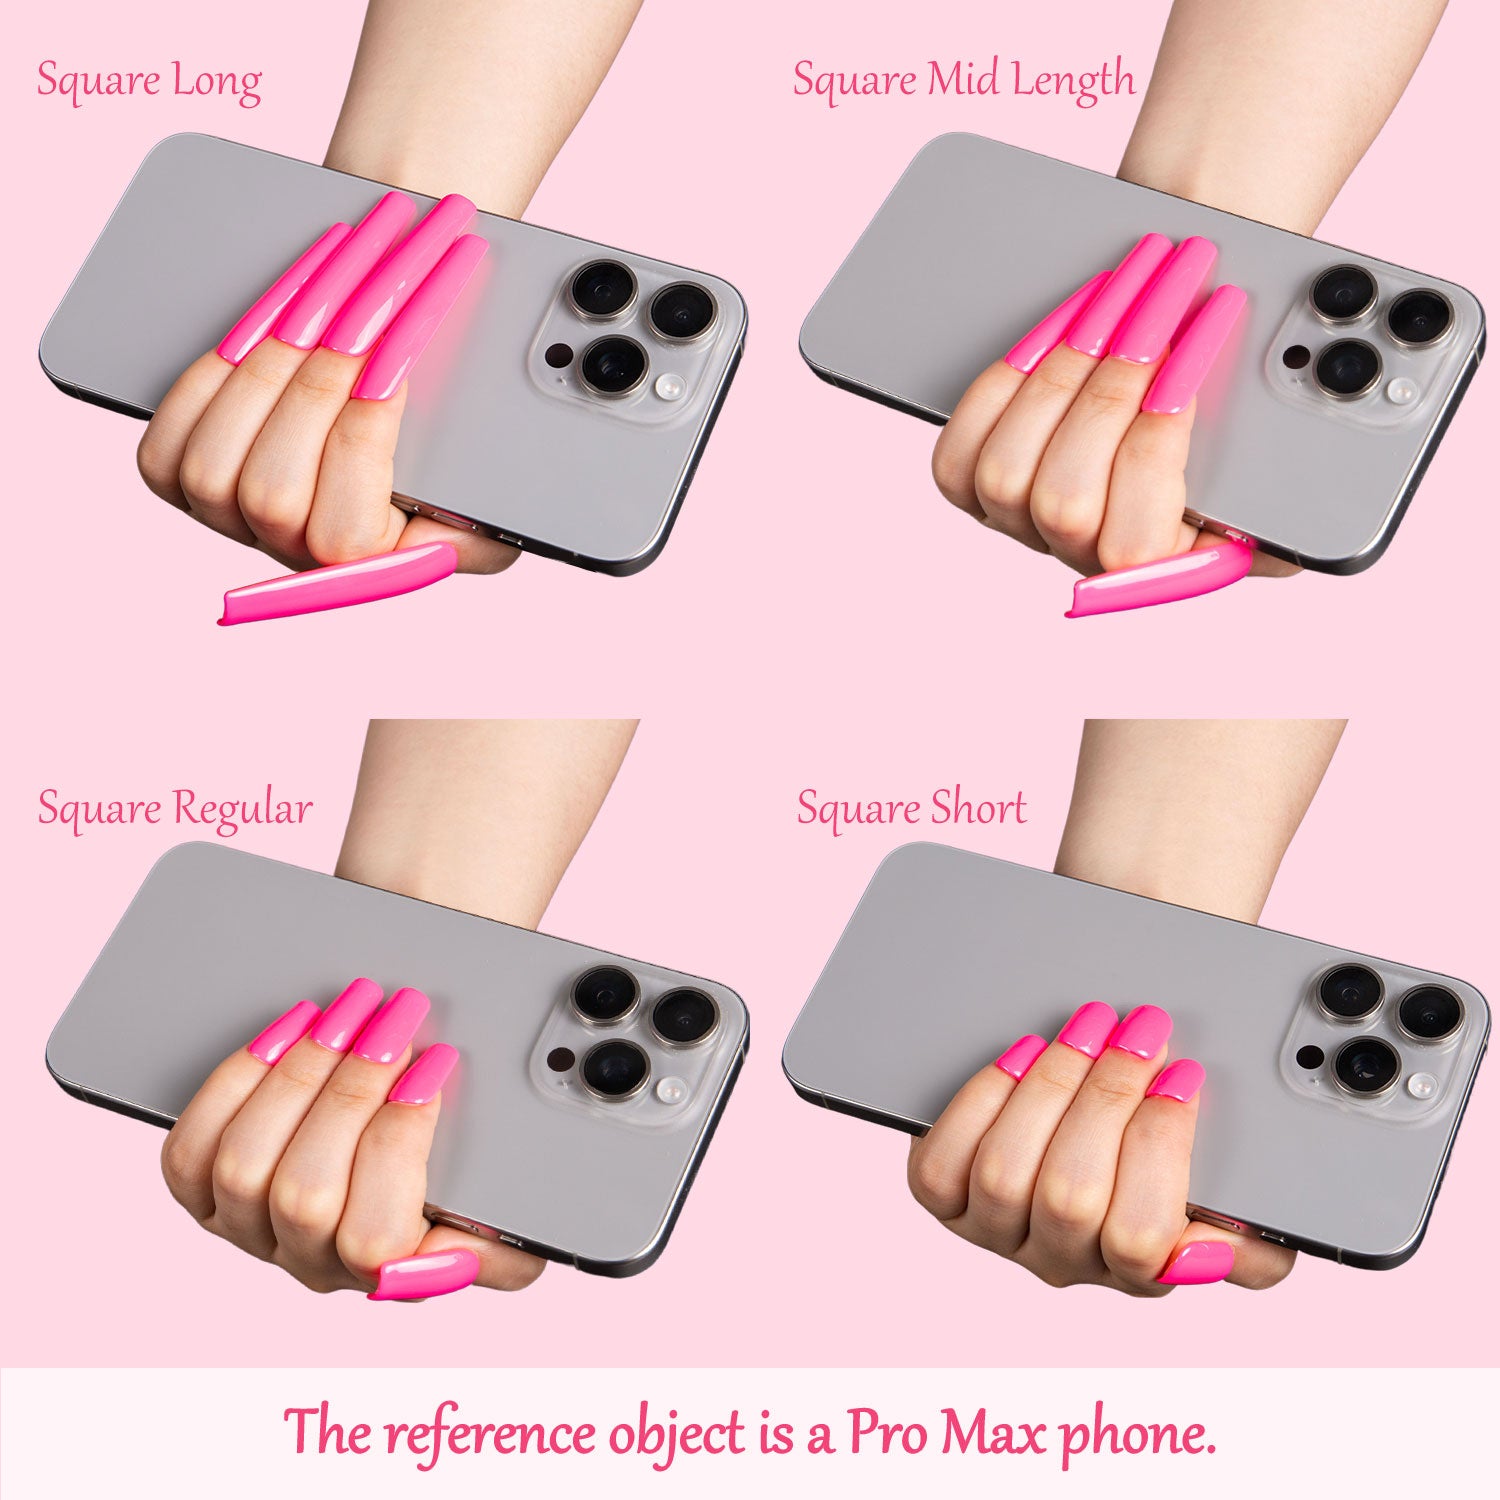 Comparison of four pink square-shaped press-on nail lengths (Long, Mid Length, Regular, Short) held by hands with a Pro Max phone for scale from Lovful.com.